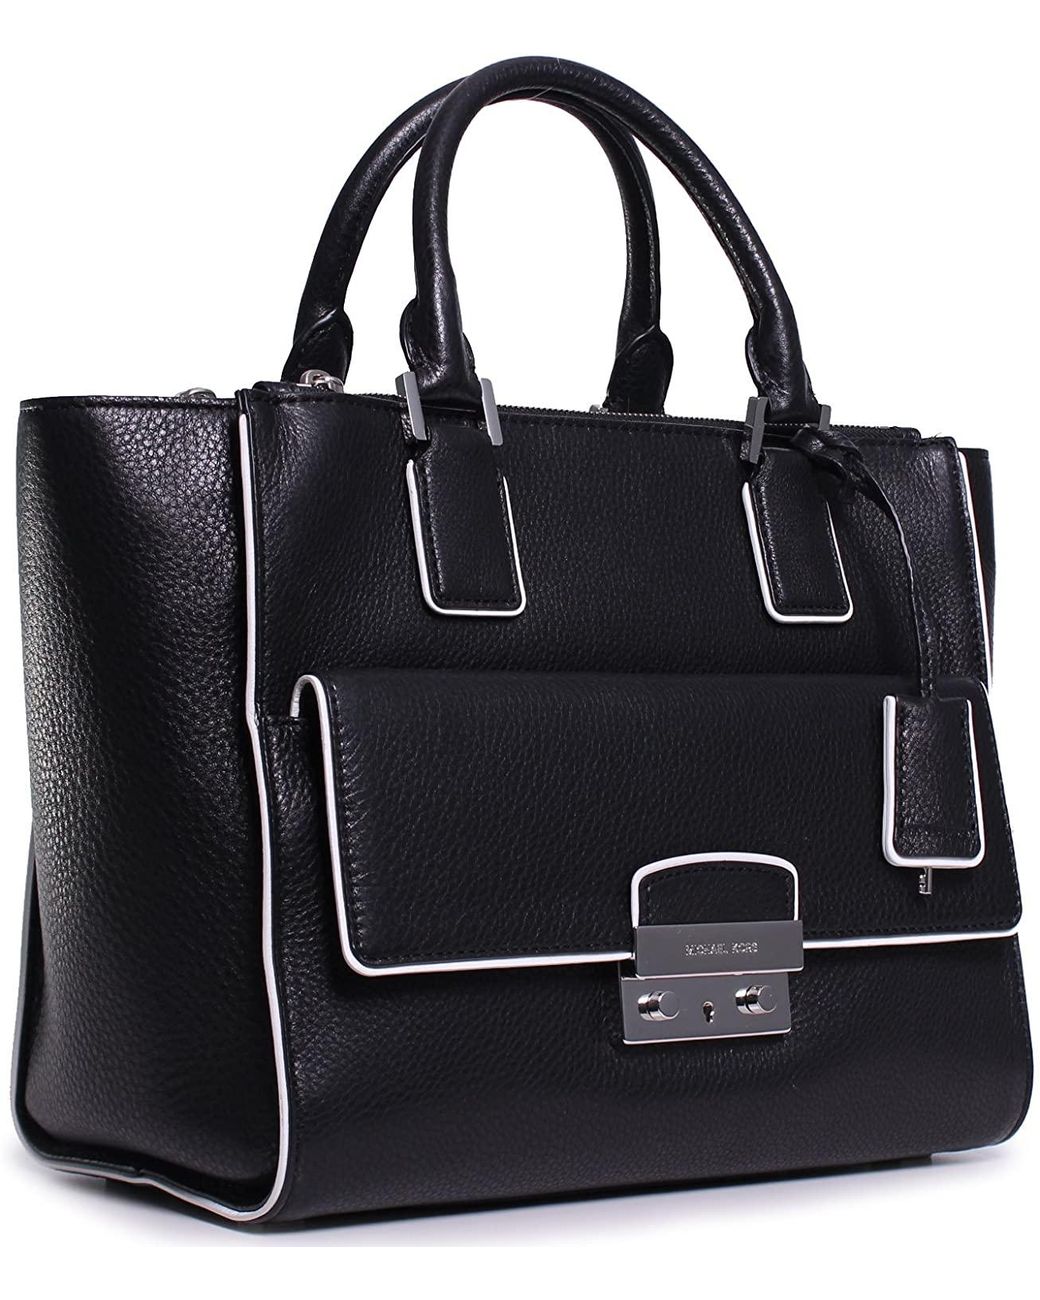 Michael Kors Leather Audrey Large Convertible Satchel Bag in Black Womens Bags Satchel bags and purses Save 19% 